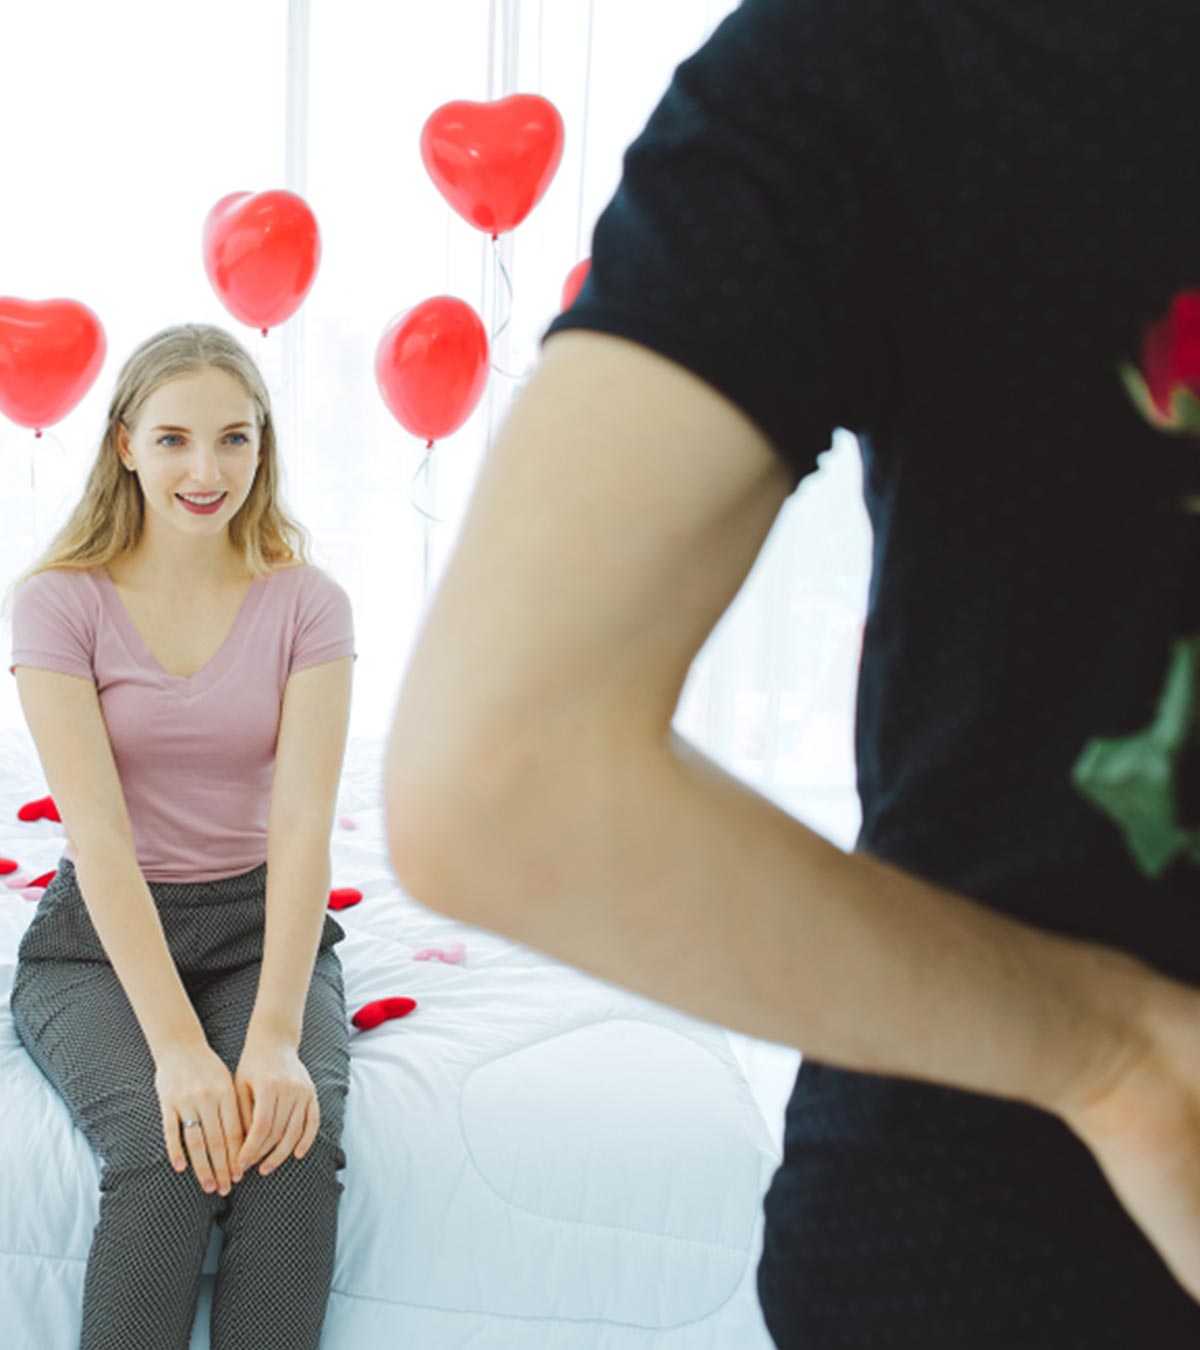 35 Simple Ways To Make Her Feel Special And Loved